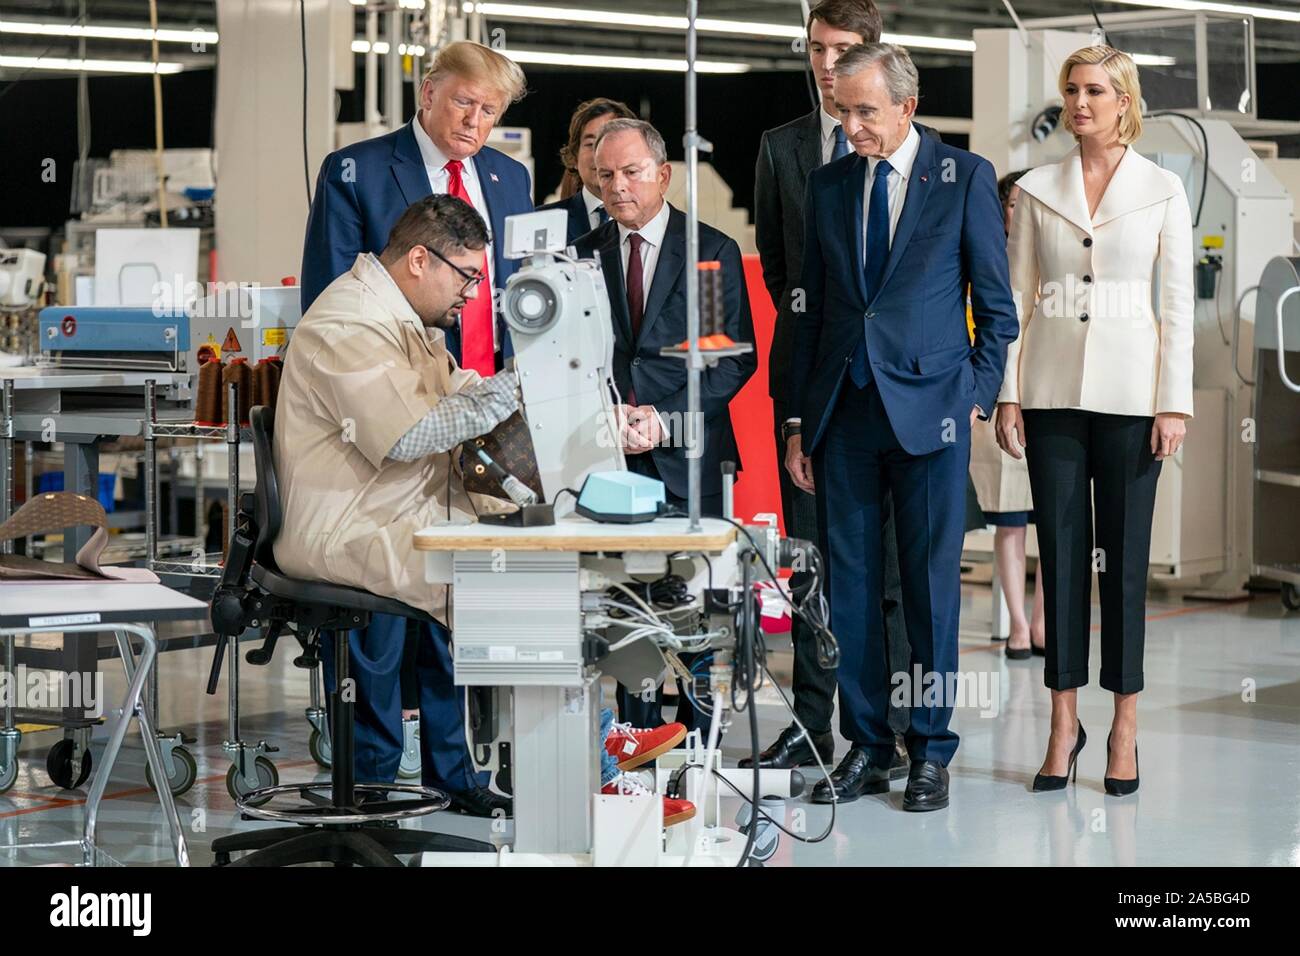 U.S President Donald Trump tours the newly opened Louis Vuitton Workshop Rochambeau October 17, 2019 in Alvarado, Texas. Joining the president from left to right are: are Michael Burke of LVMH, Alexandre Arnault, Bernard Arnault, chief executive of LVMH, and Ivanka Trump. Stock Photo